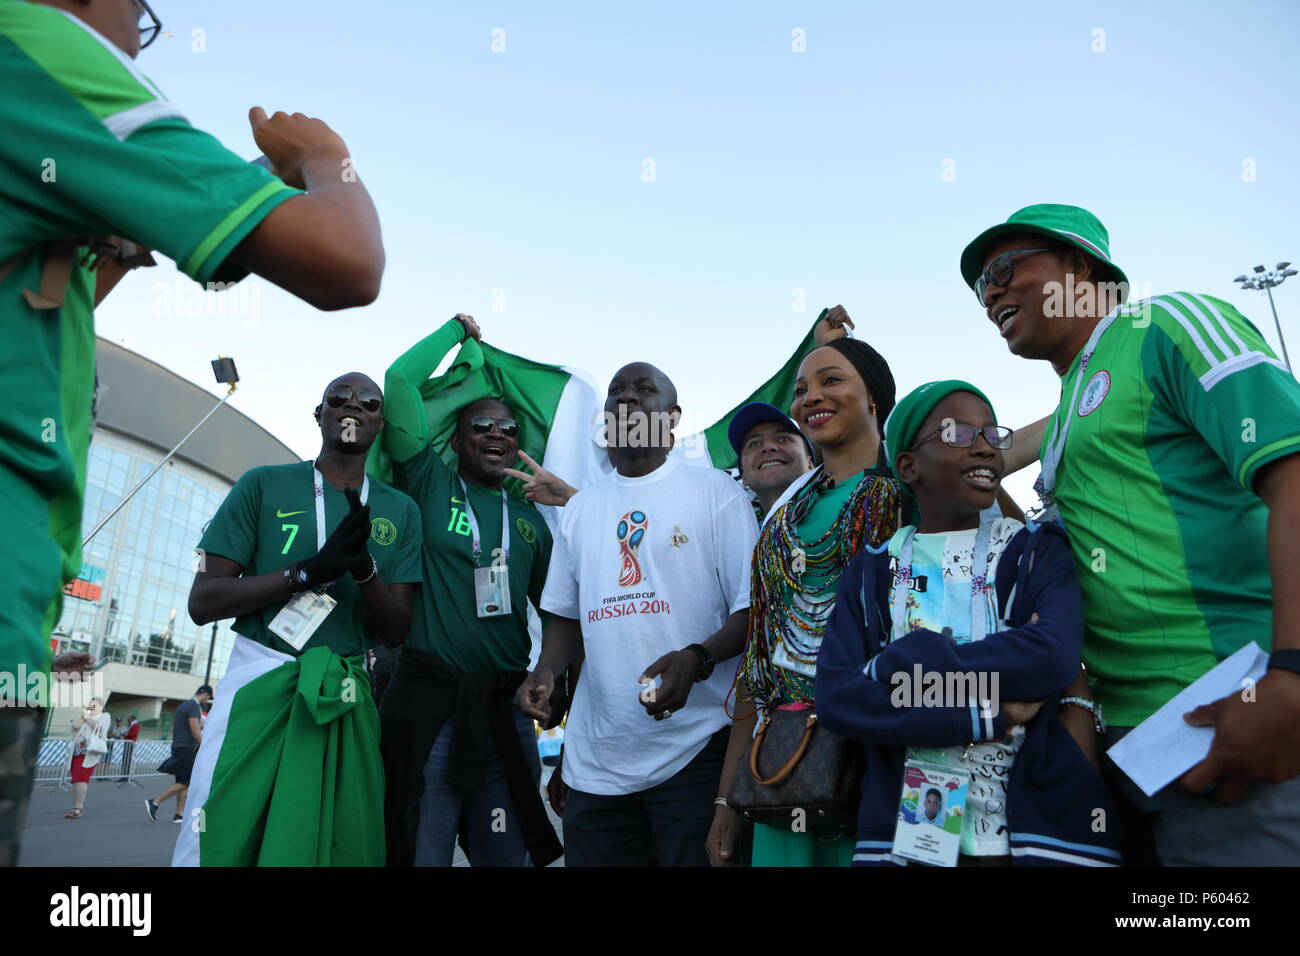 St. Petersburg, Russia - June 26, 2018: Nigerian football fans with national flag going to Saint Petersburg stadium to support their team in the match Stock Photo